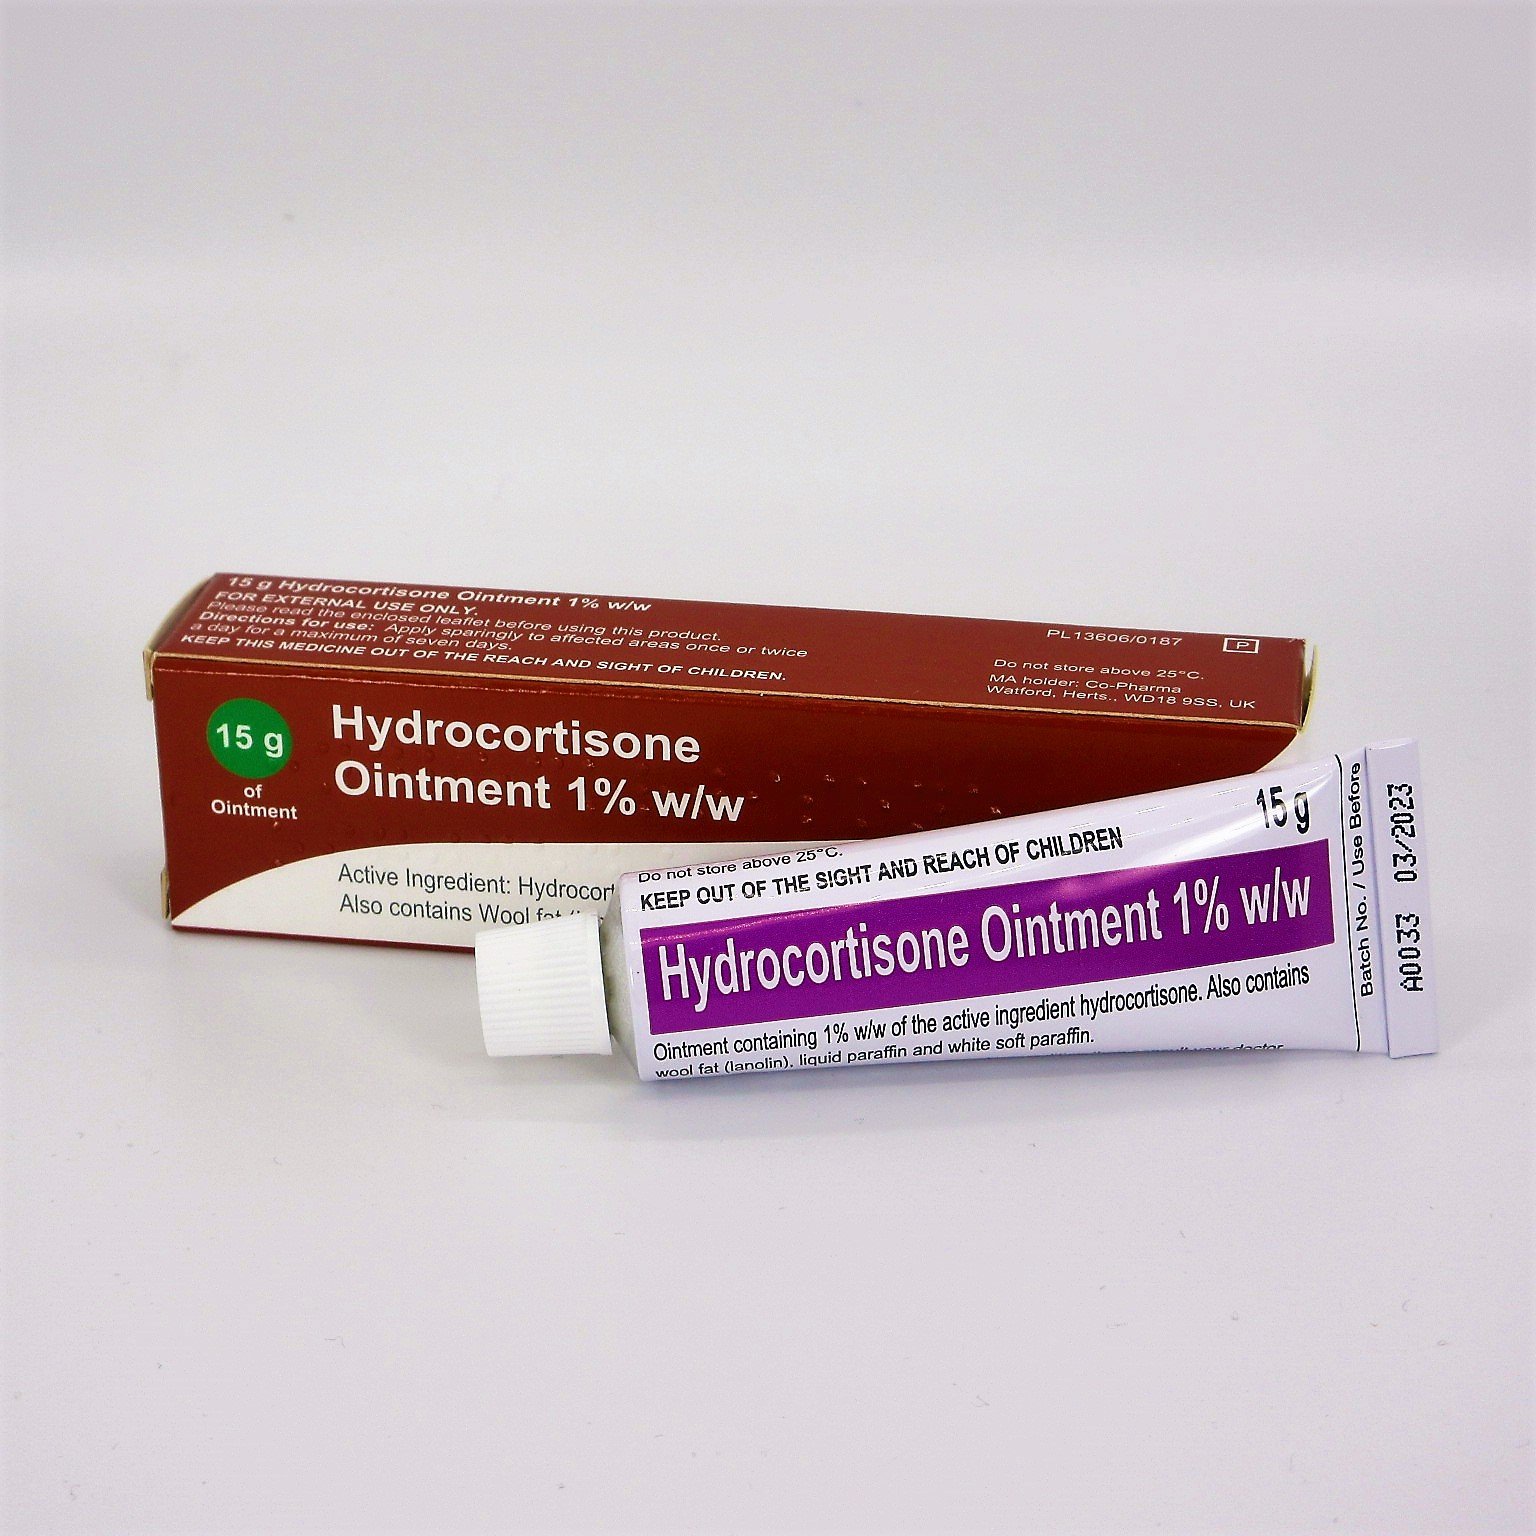 5 x Hydrocortisone Ointment 1% Bite and Sting Relief (15g ...